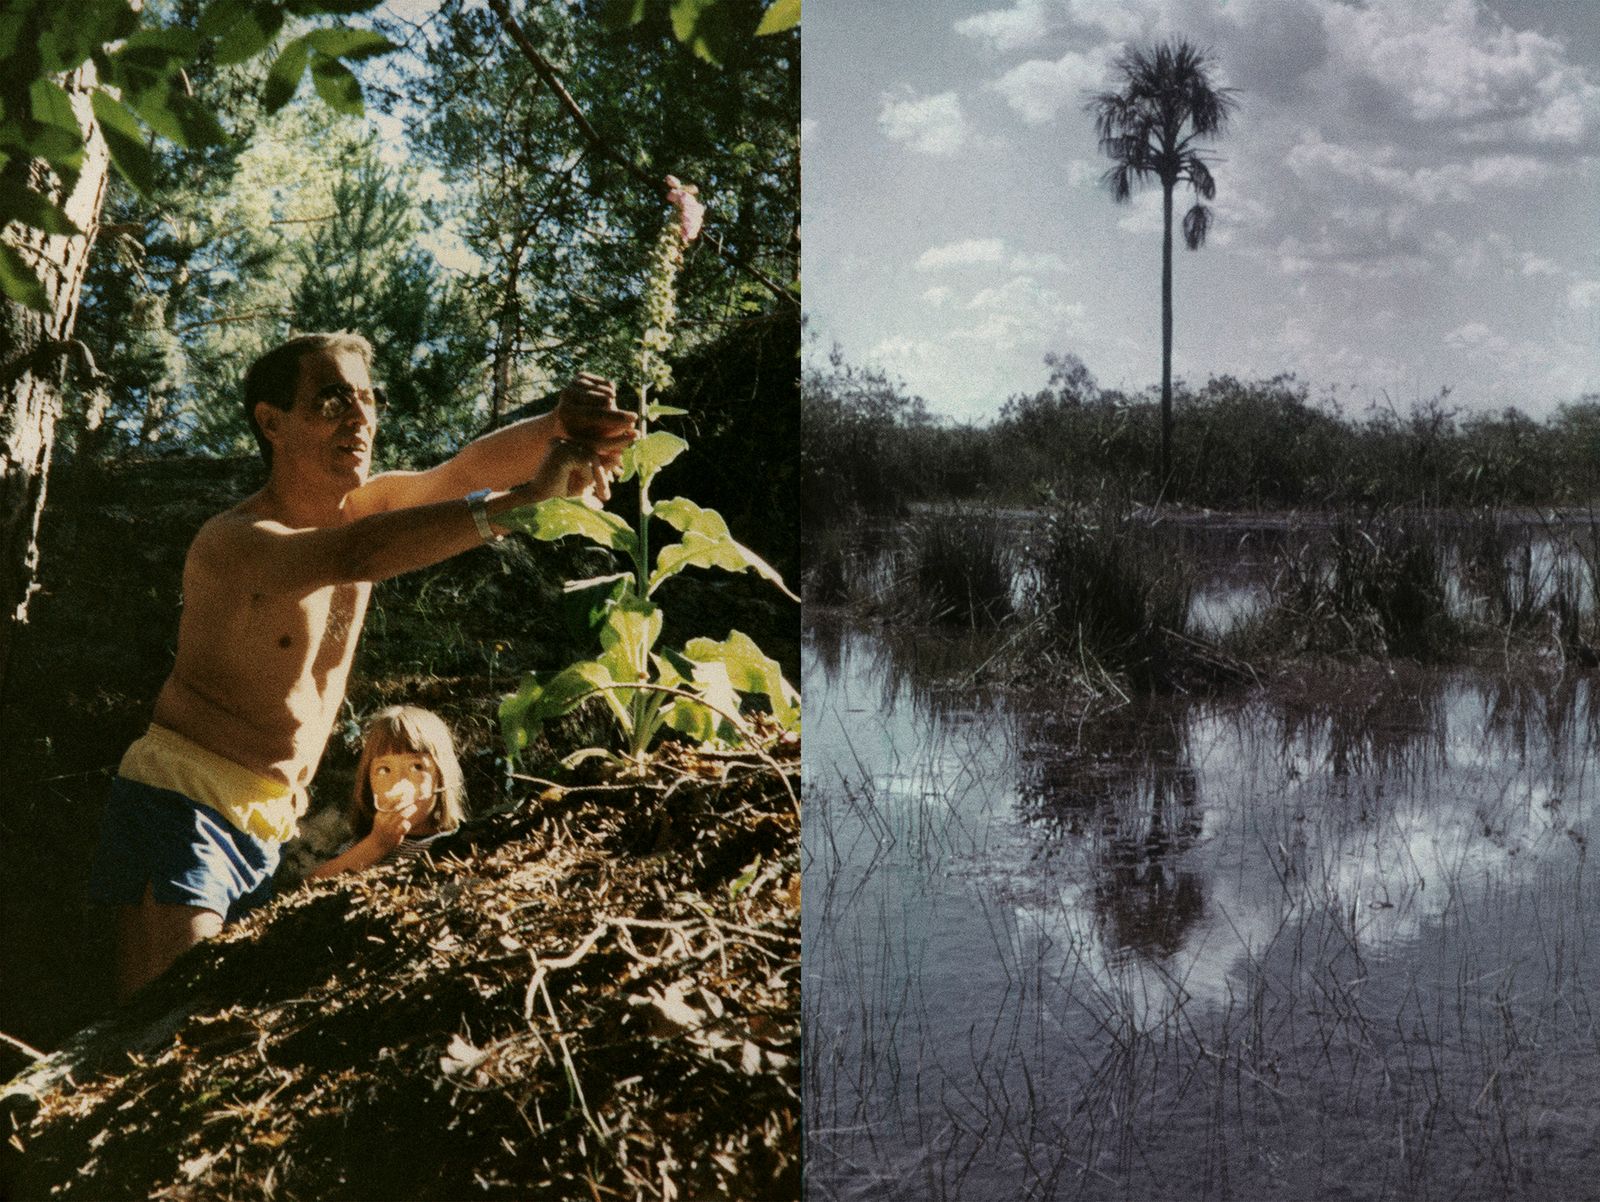 © Raquel Bravo - Image from the Mato Grosso photography project